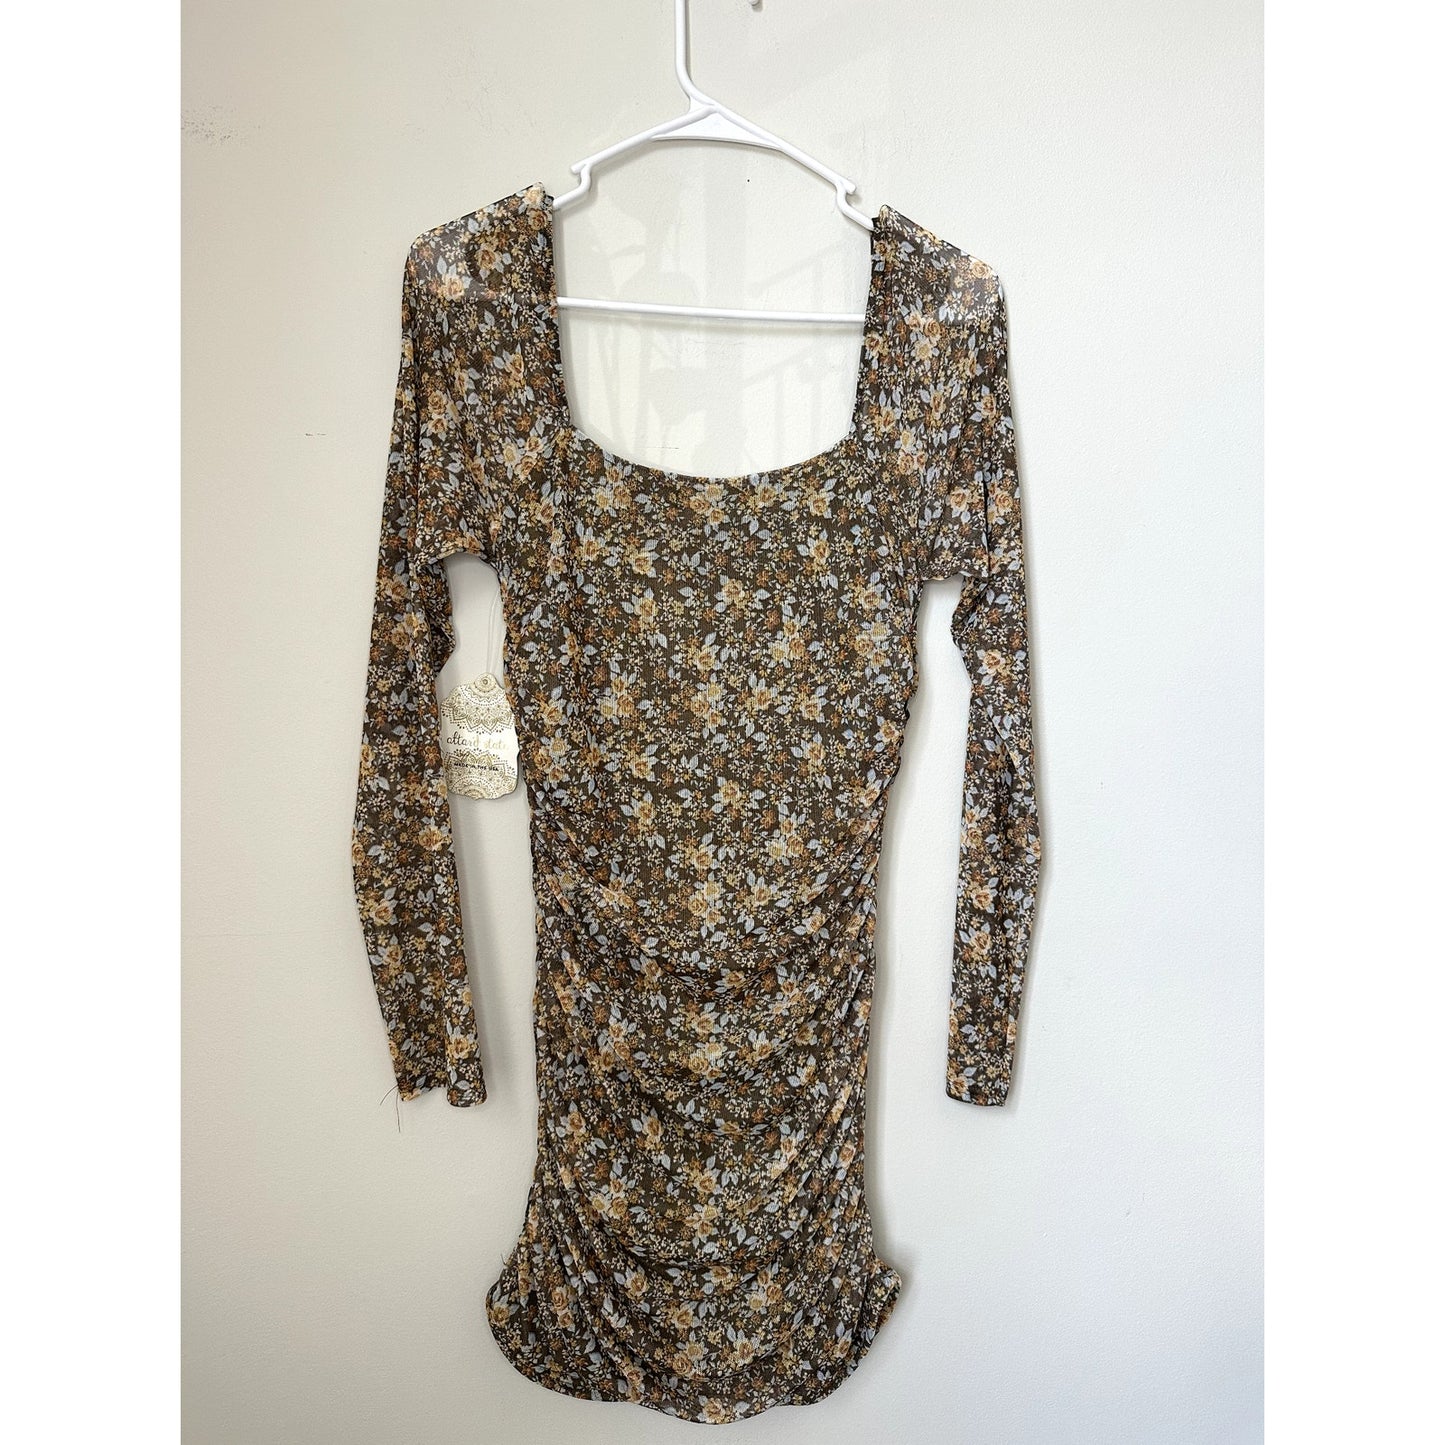 NWT Altar'd State Floral Long Sleeve Mini Dress, Size M